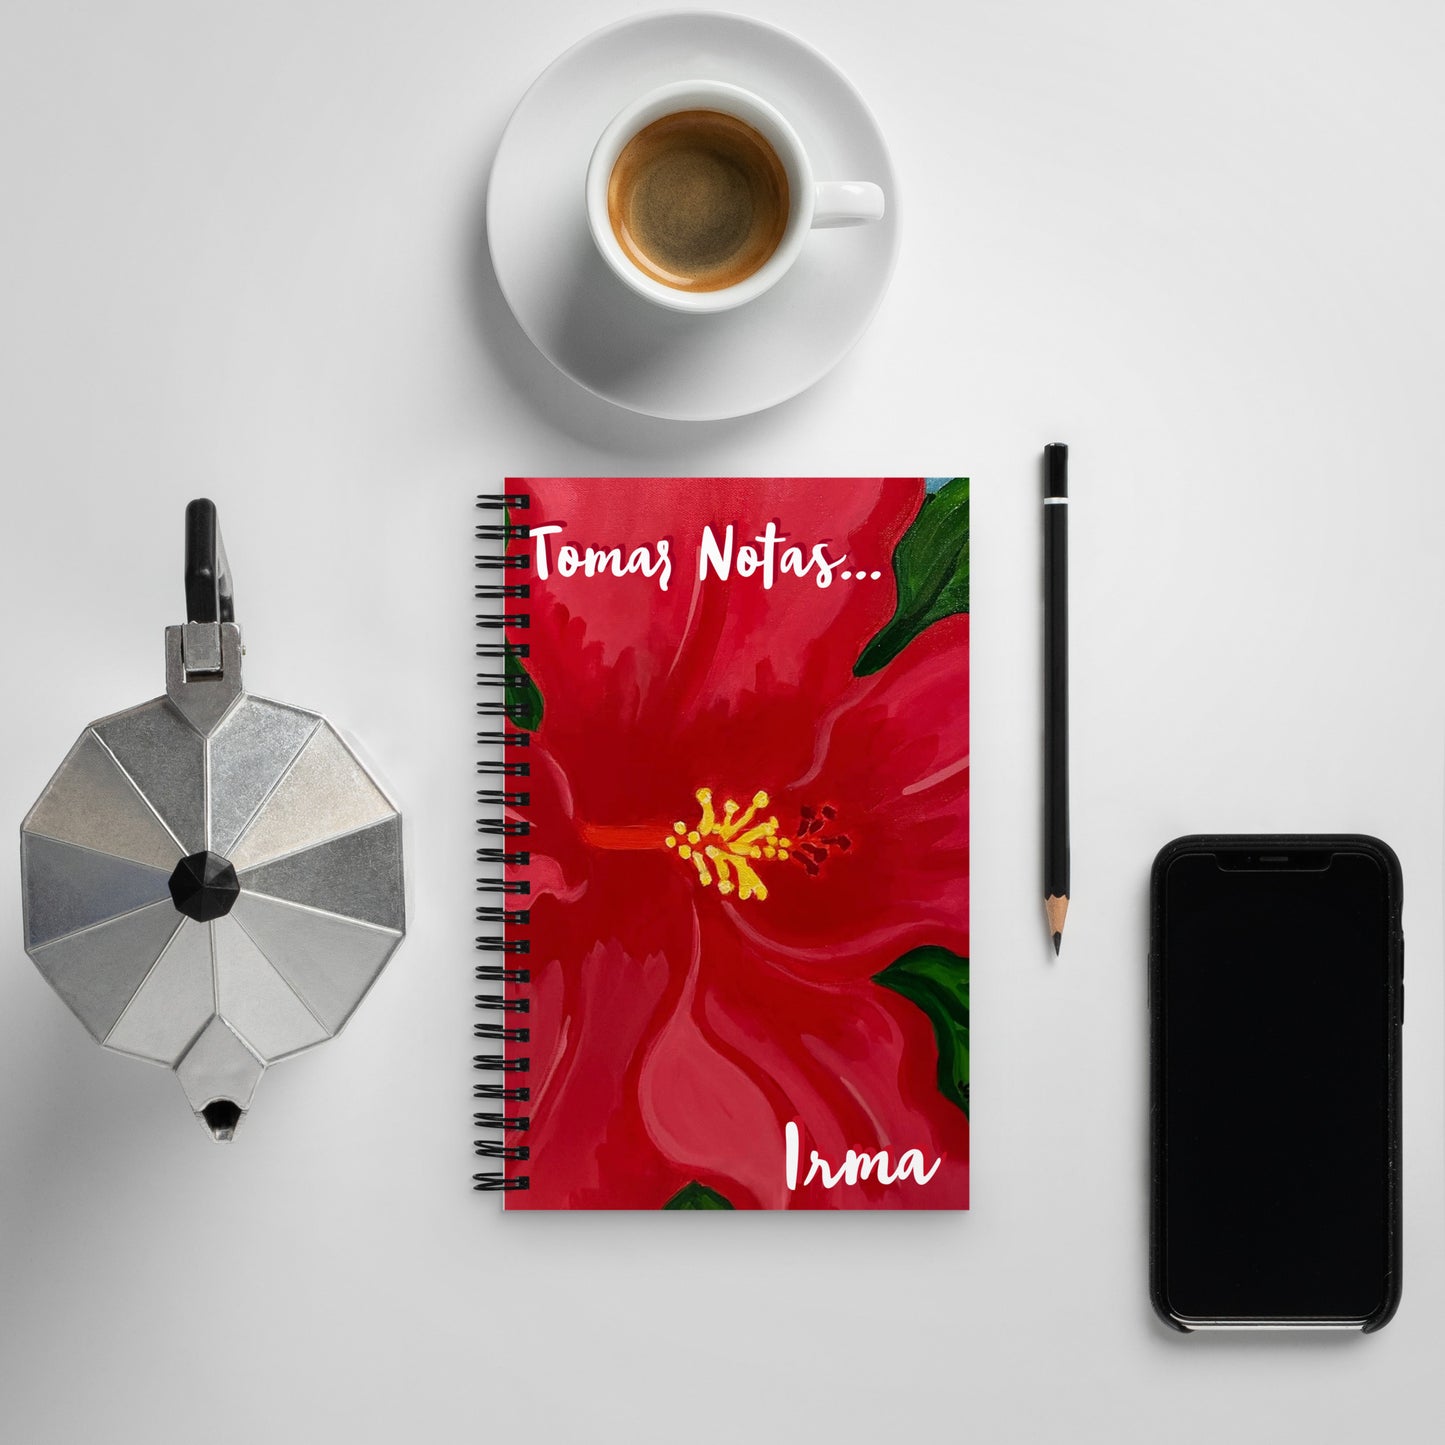 Tomar Notas by Irma Spiral notebook